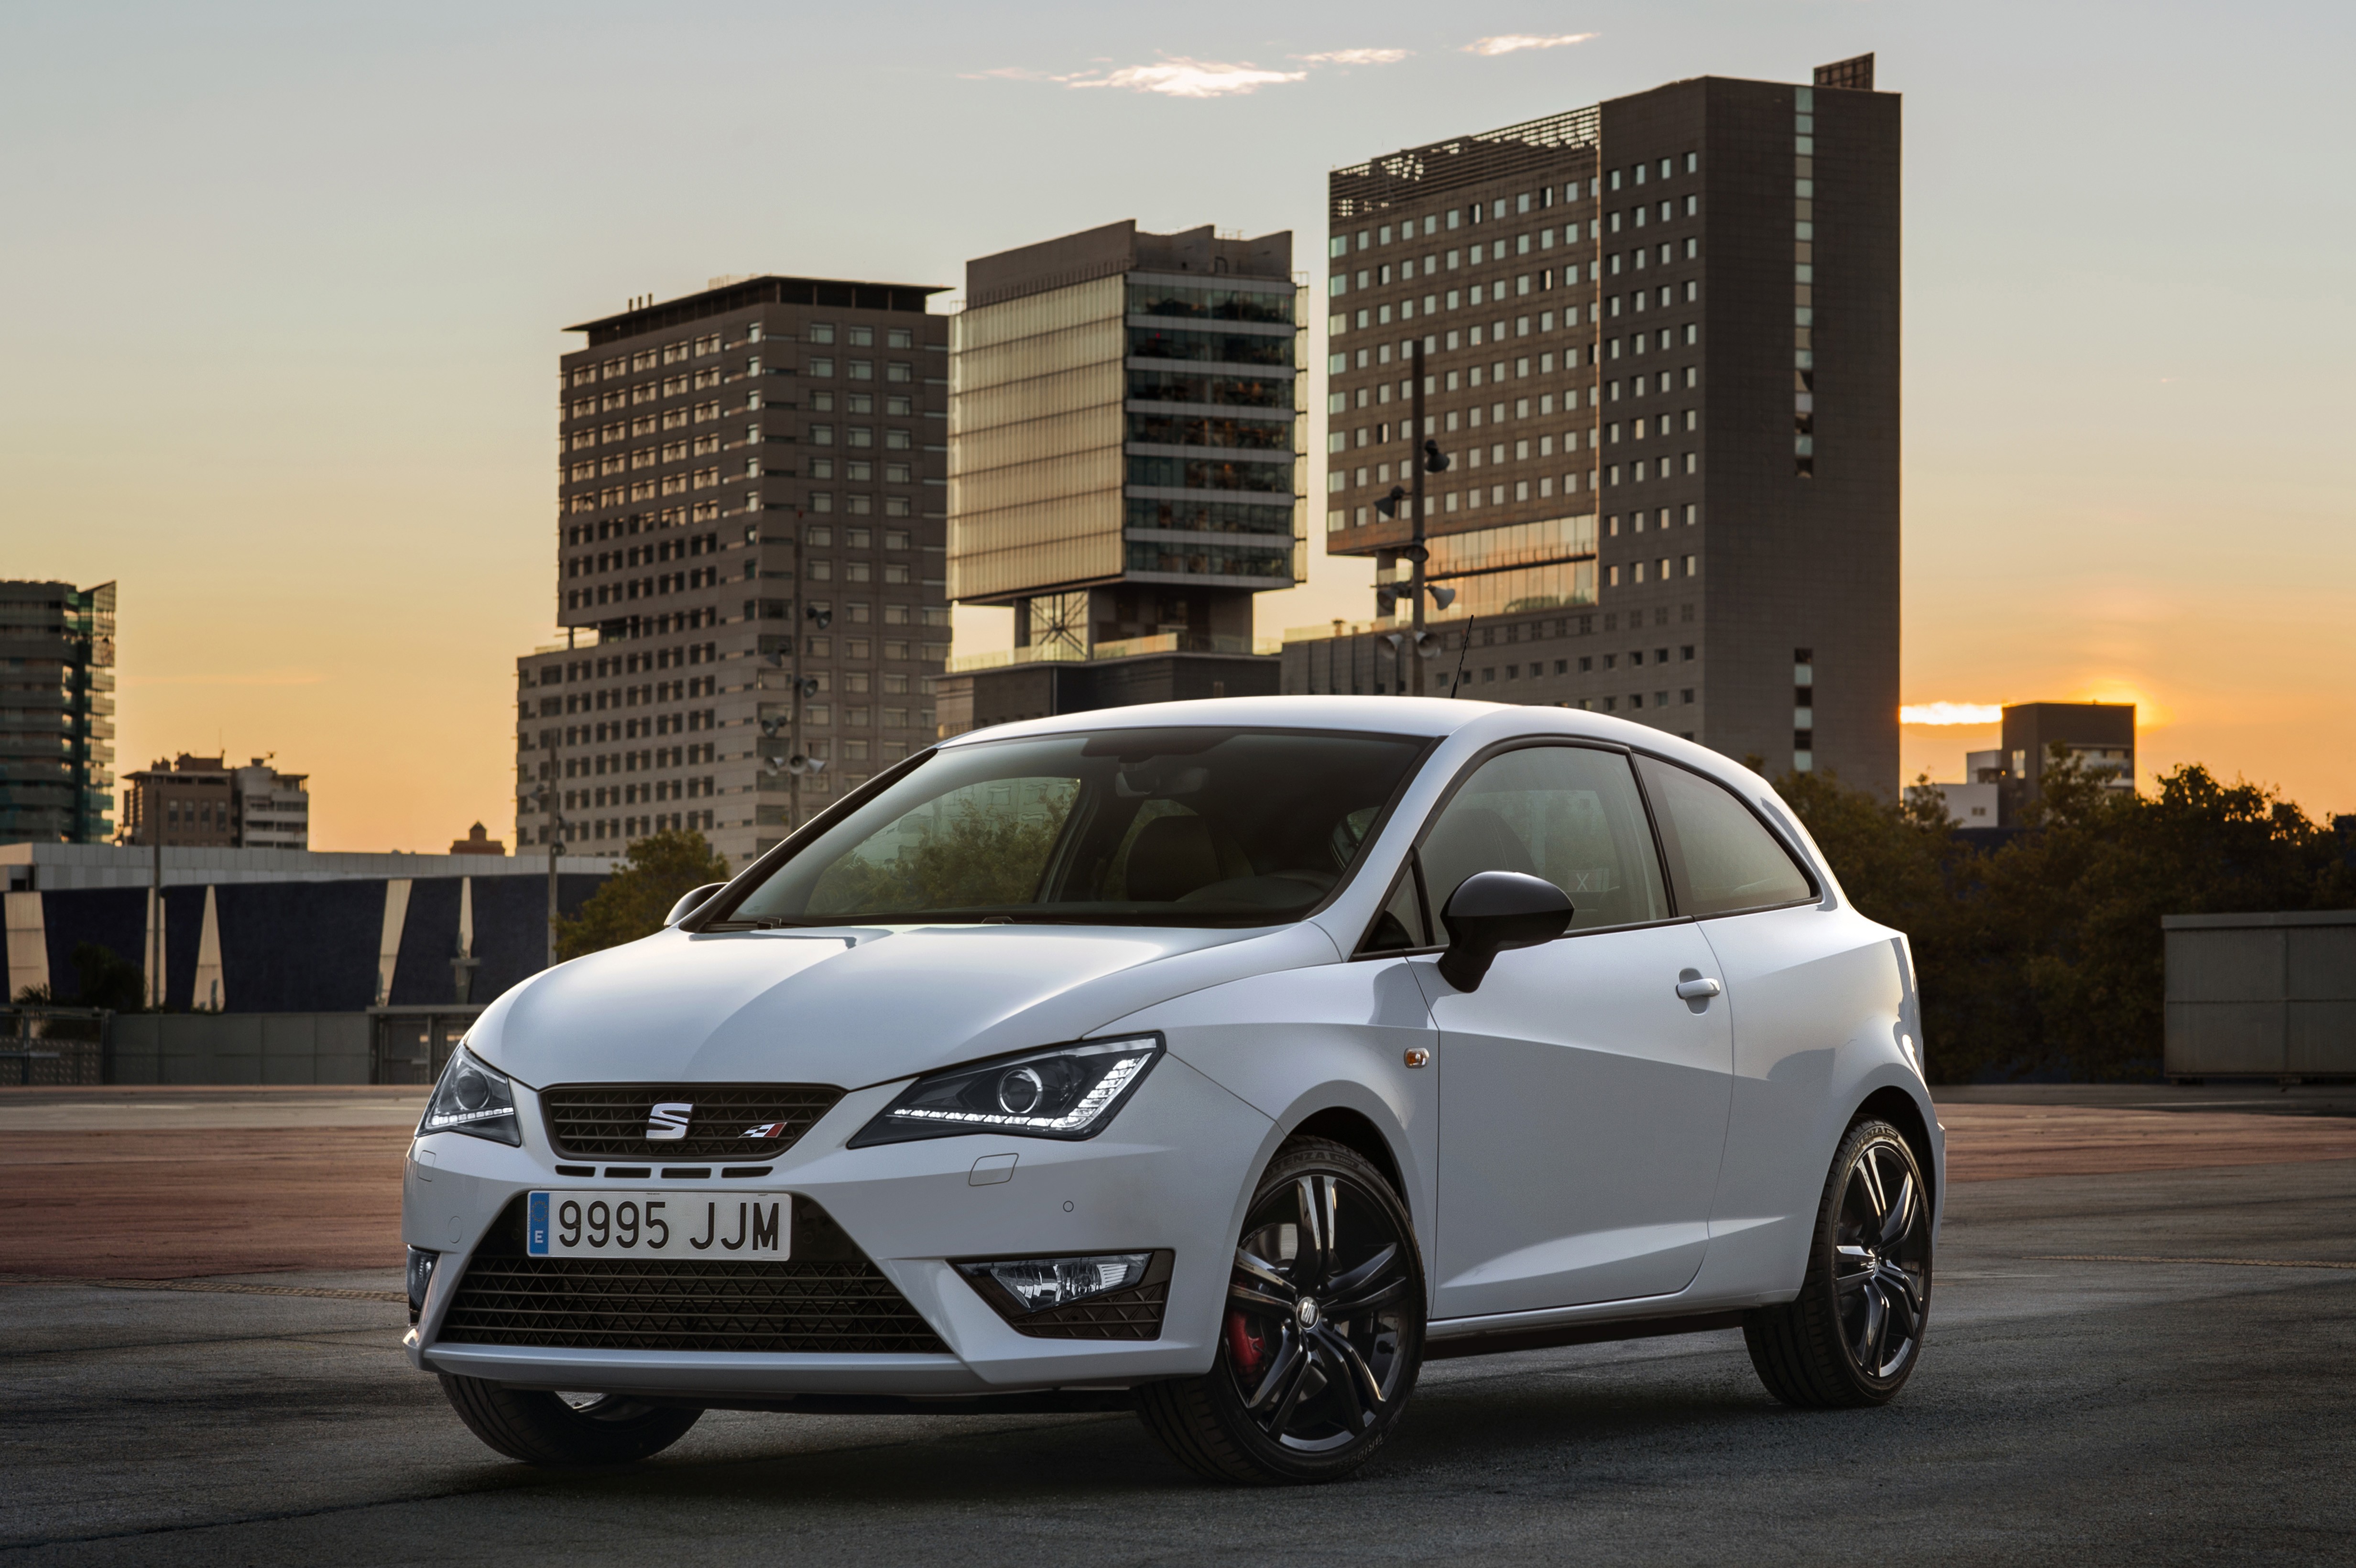 2016 SEAT Ibiza Cupra Does 100 KM/H in 6.7s Thanks to 1.8L Turbo Engine